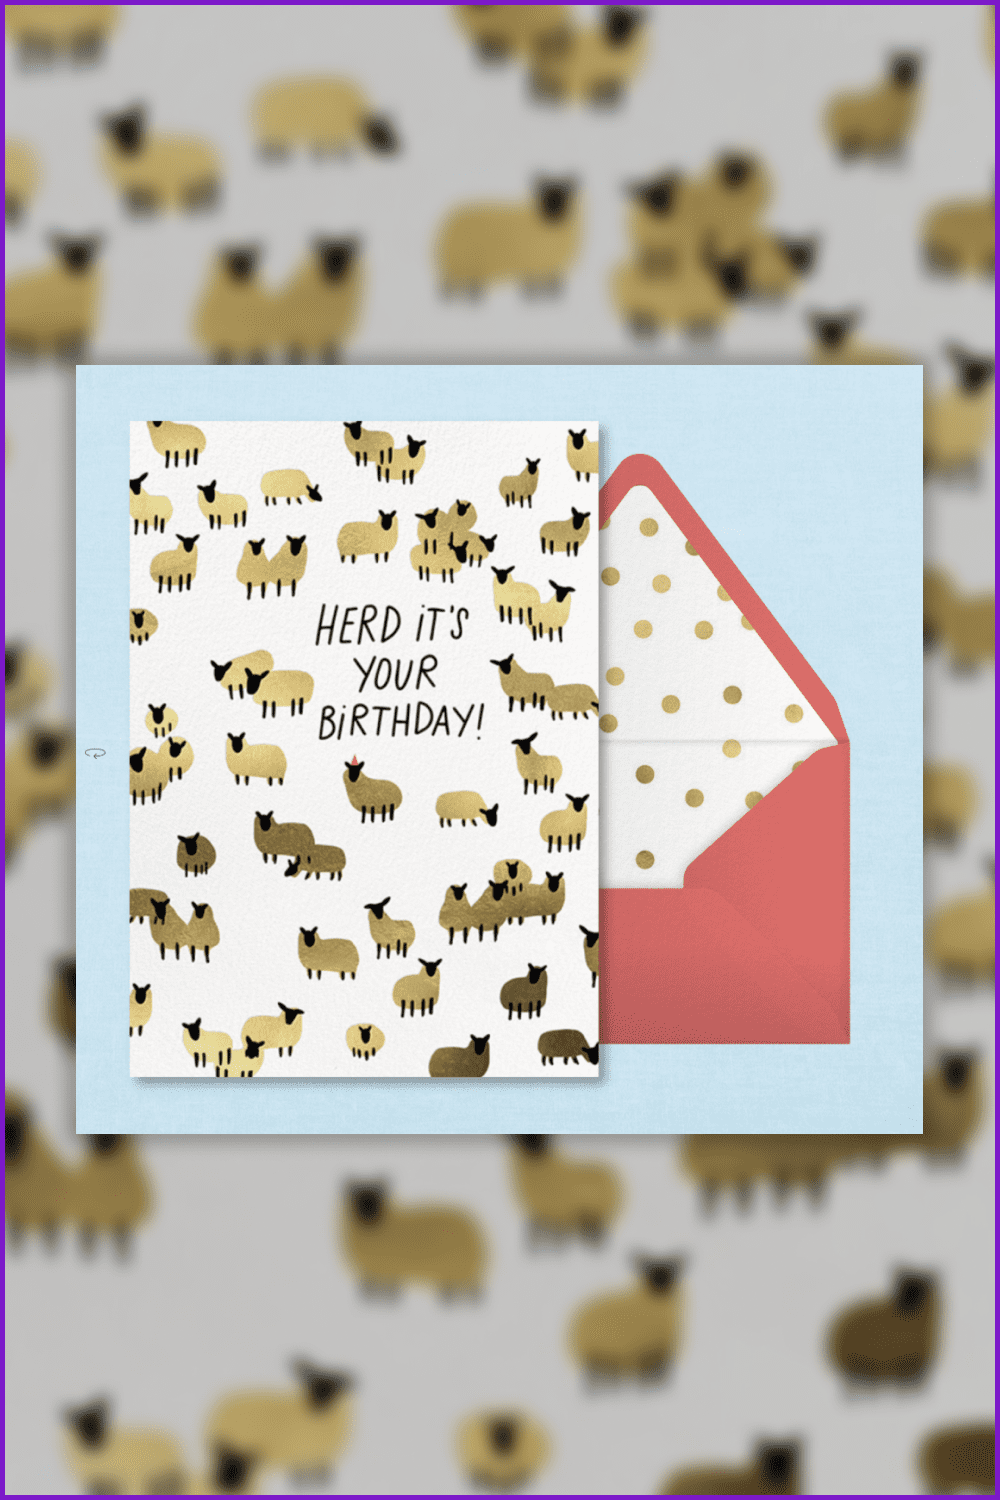 Birthday card with a flock of painted sheep.